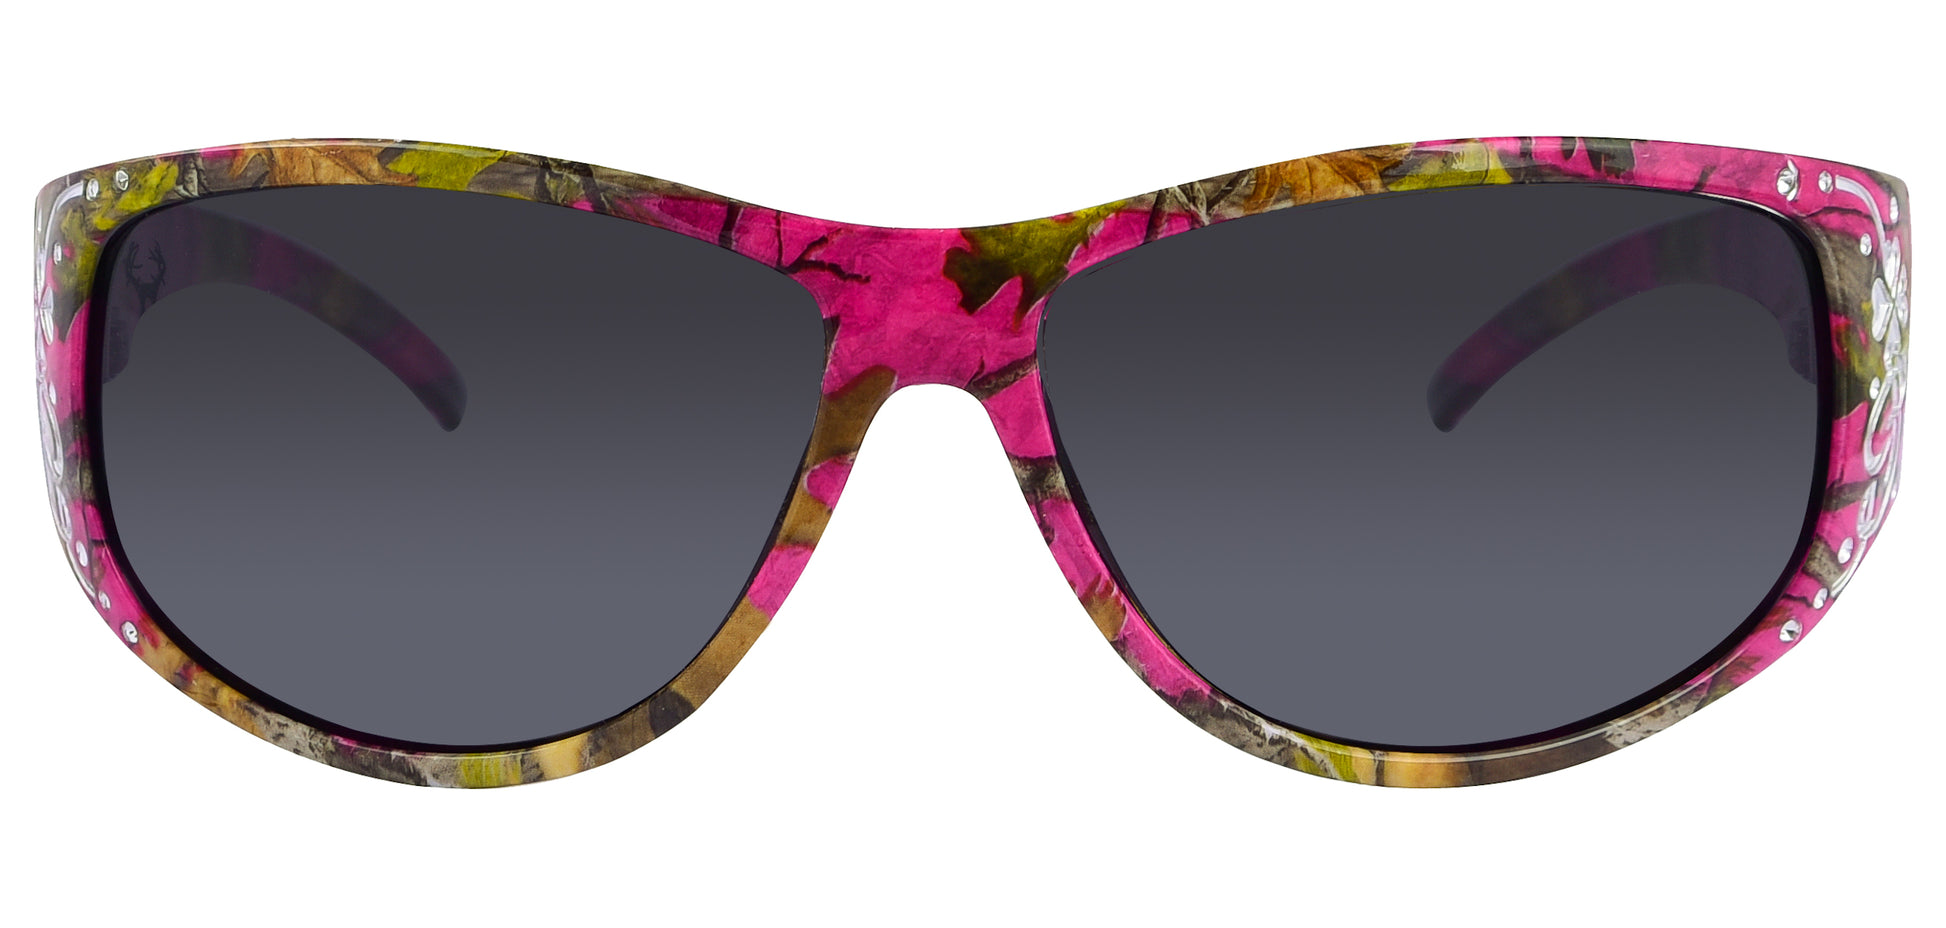 Third image: Hornz Hot Pink-Purple Camouflage Polarized Sunglasses Country Girl Style Camo & Free Matching Microfiber Pouch – Hot Pink-Purple Camo Frame - Smoke Lens